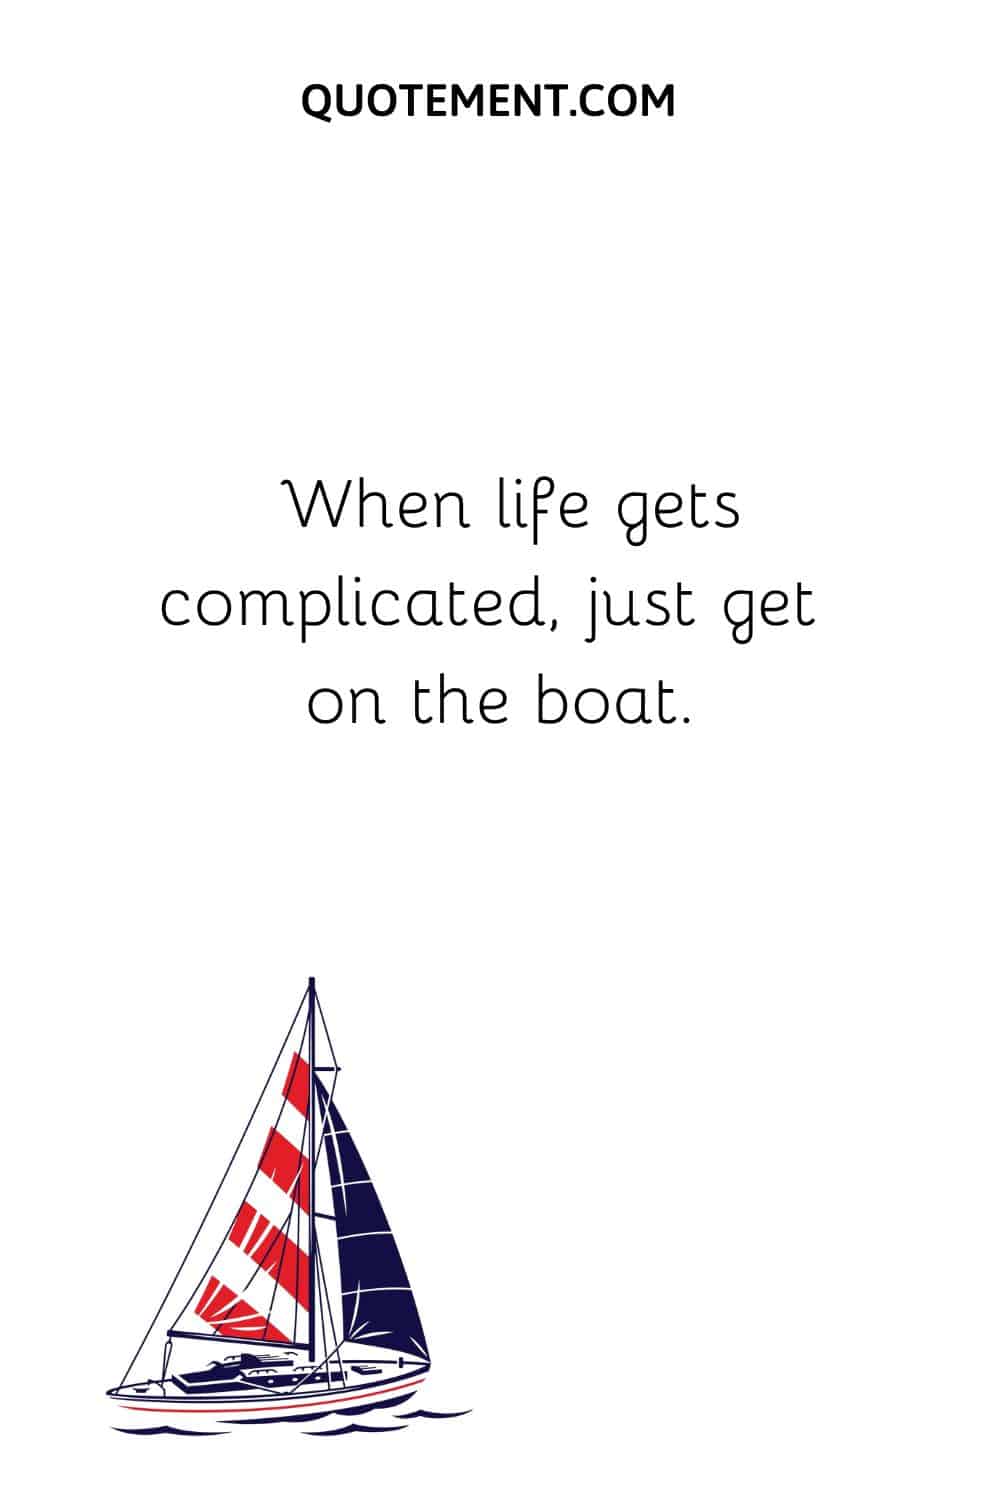 When life gets complicated, just get on the boat